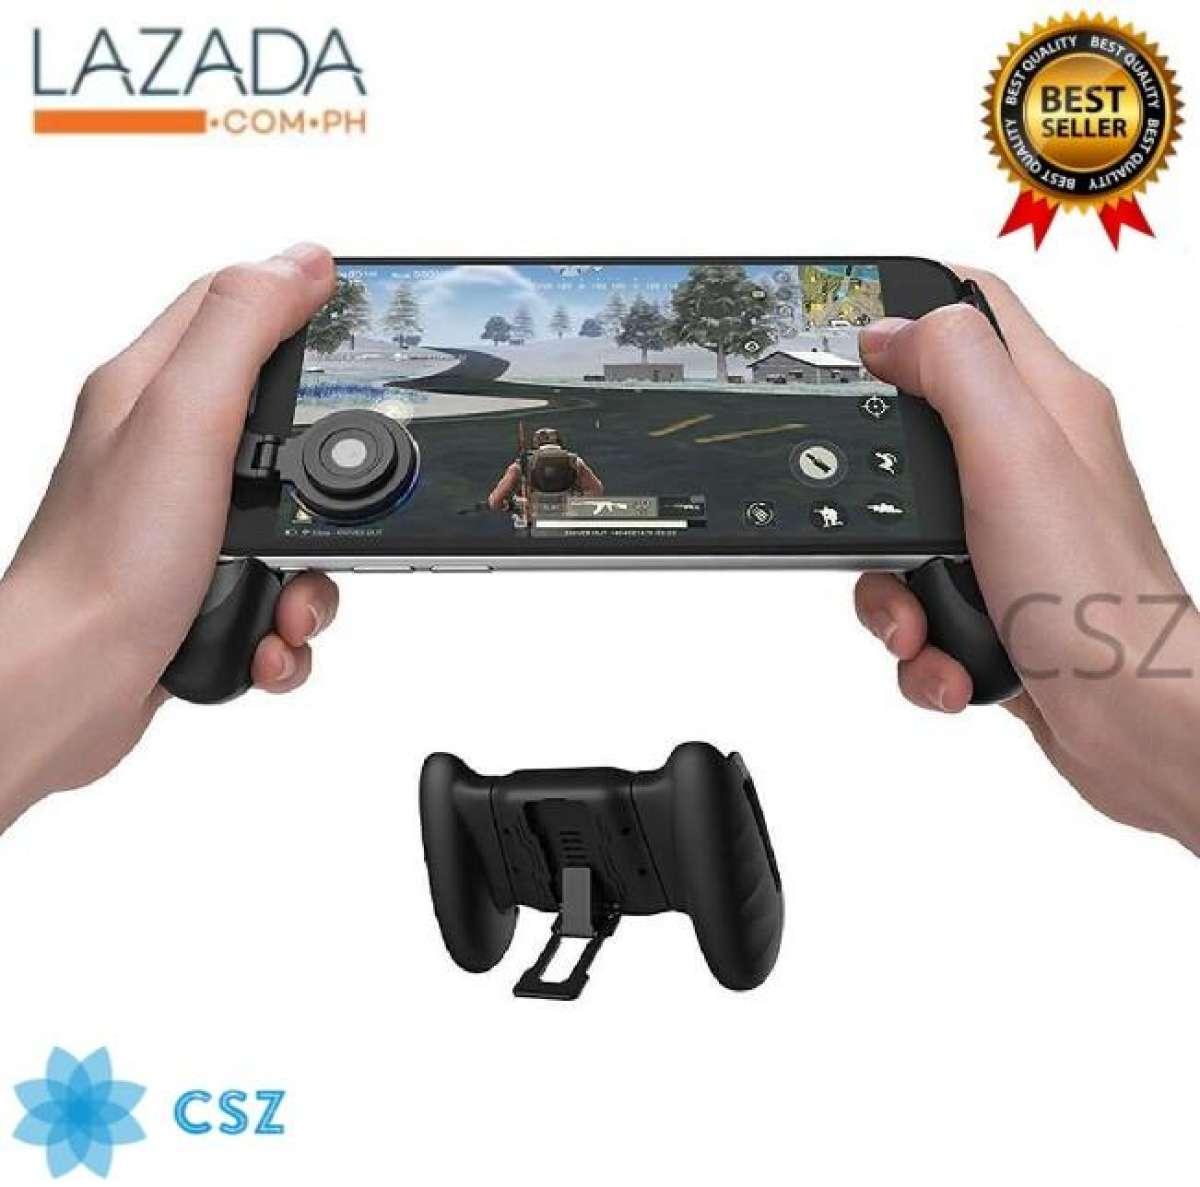 Gaming Accessories For Sale Video Game Accessories Prices Brands - mobile legends pubg ros gamepad jl01 game joystick grip extended handle game controller mobile game pad